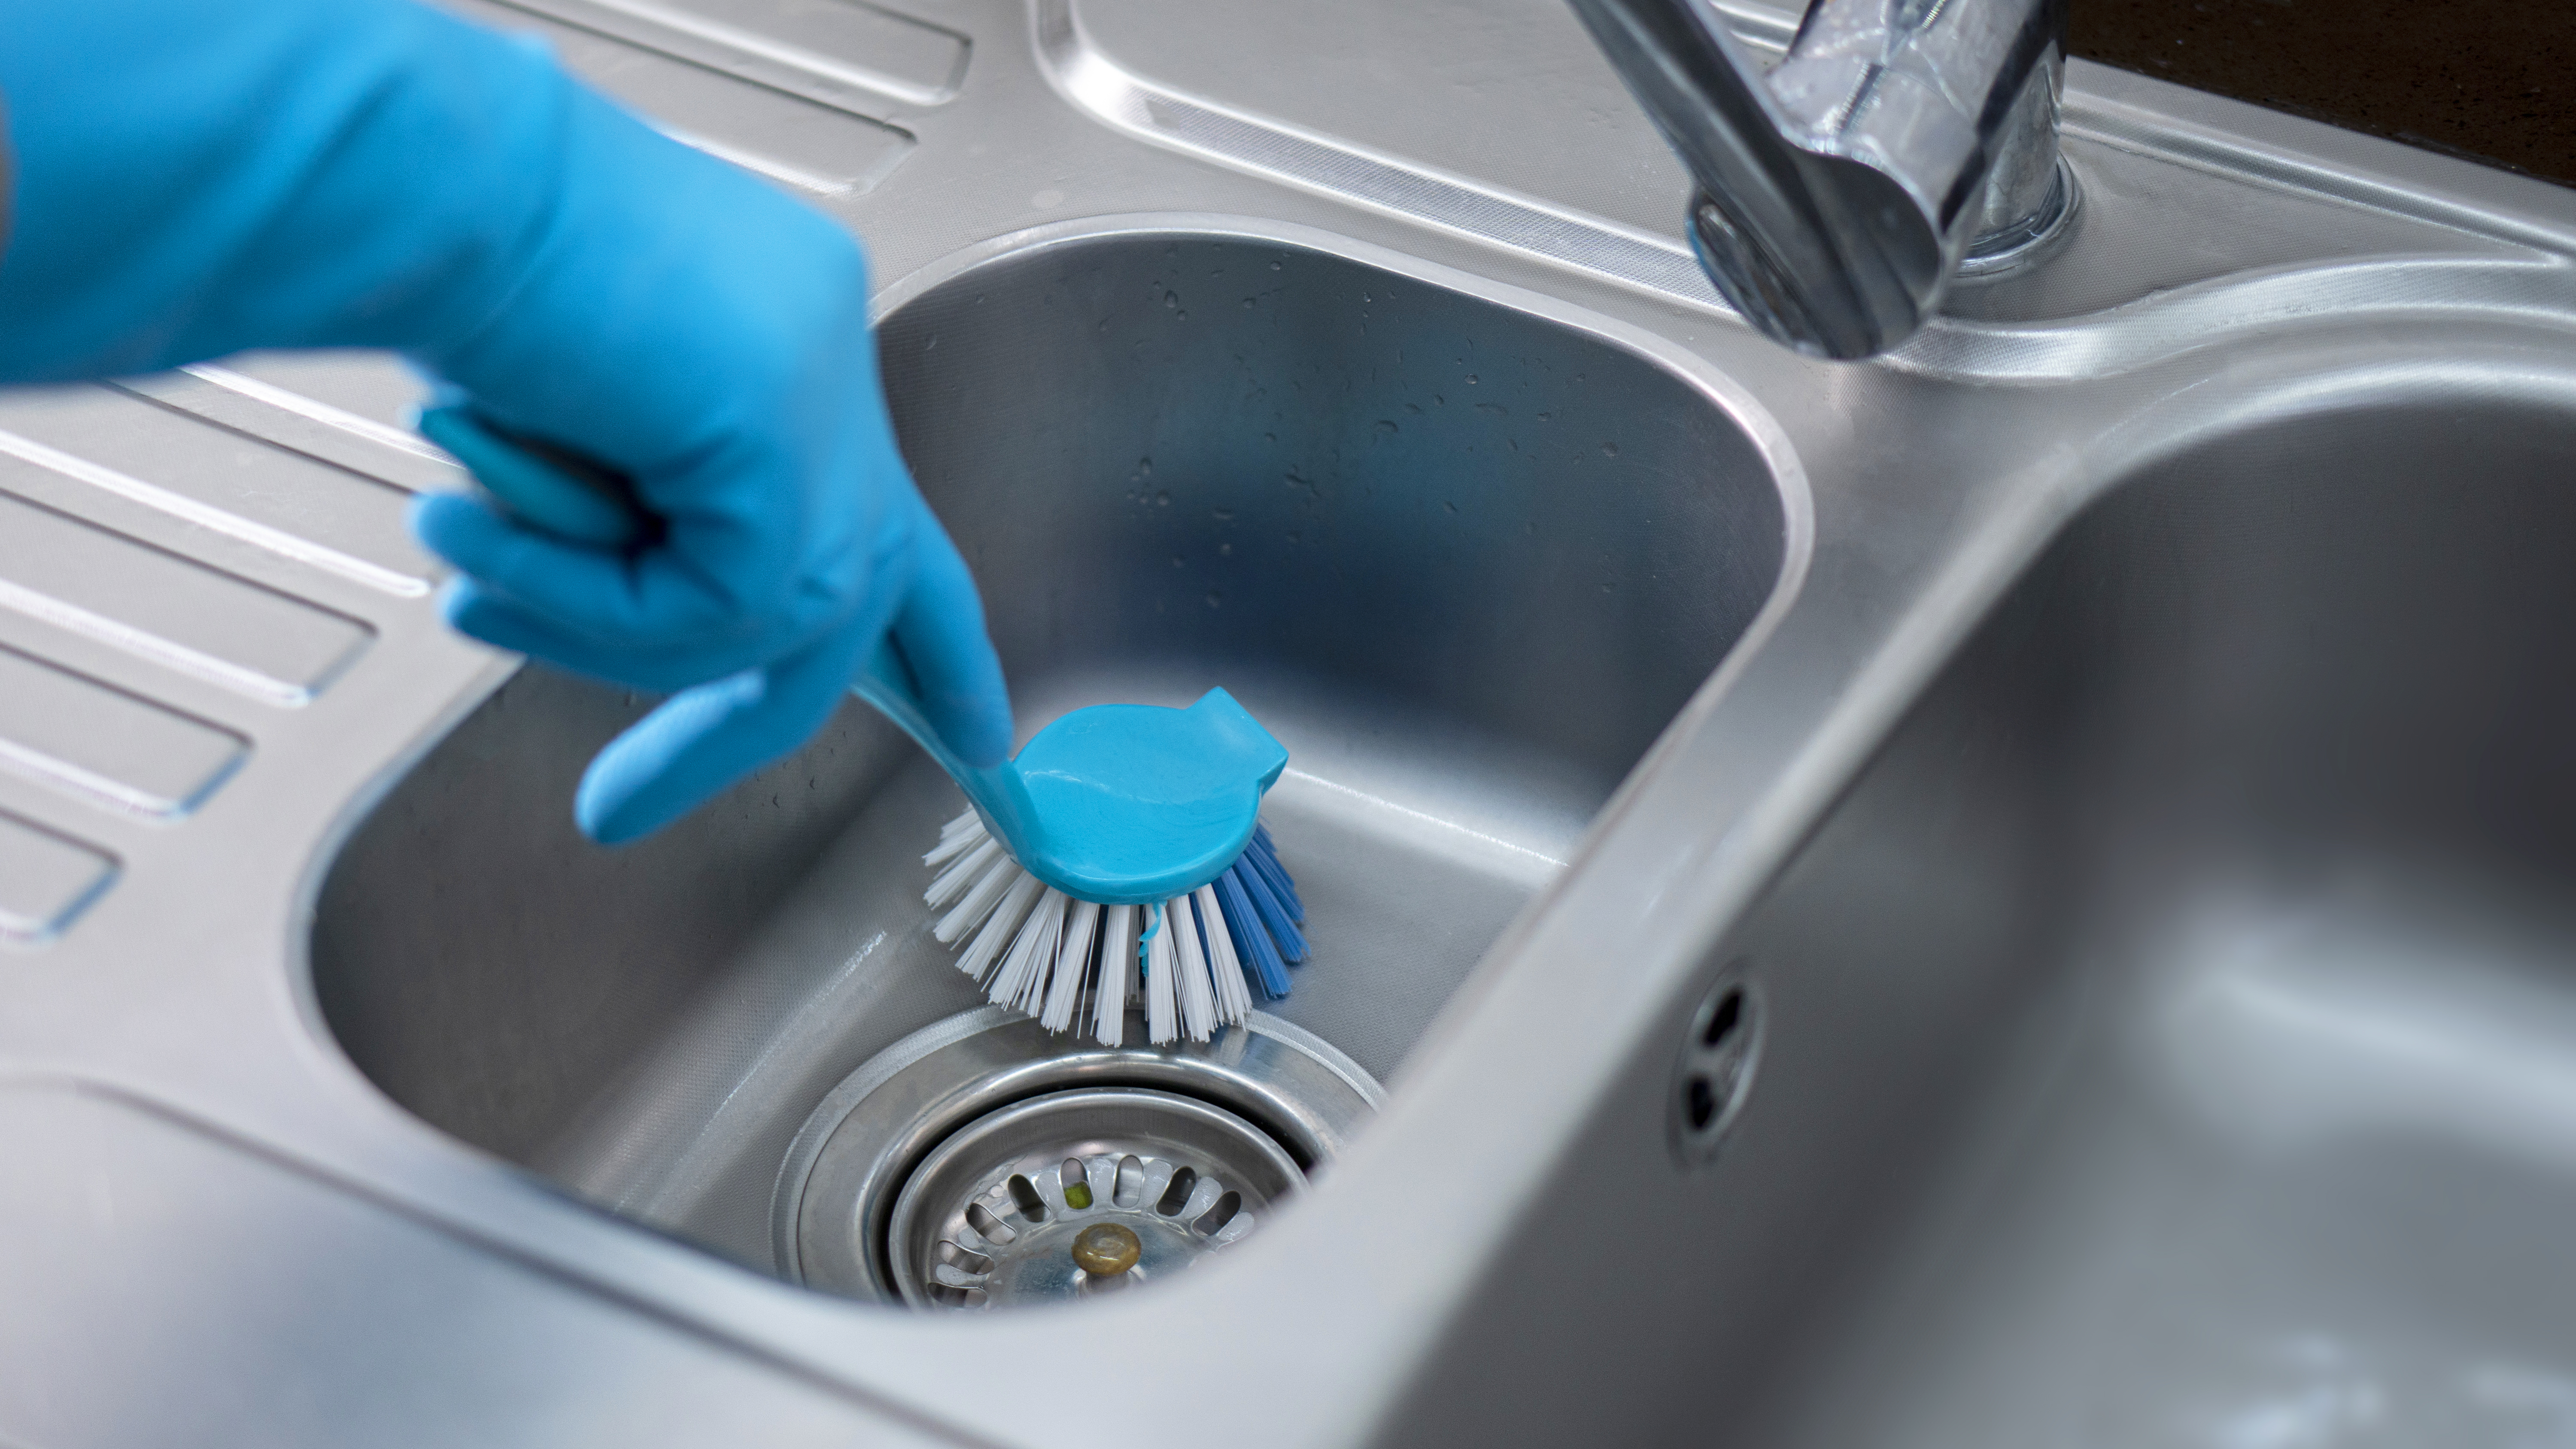 Cleaning hack helps keep fingerprints from showing up on faucets